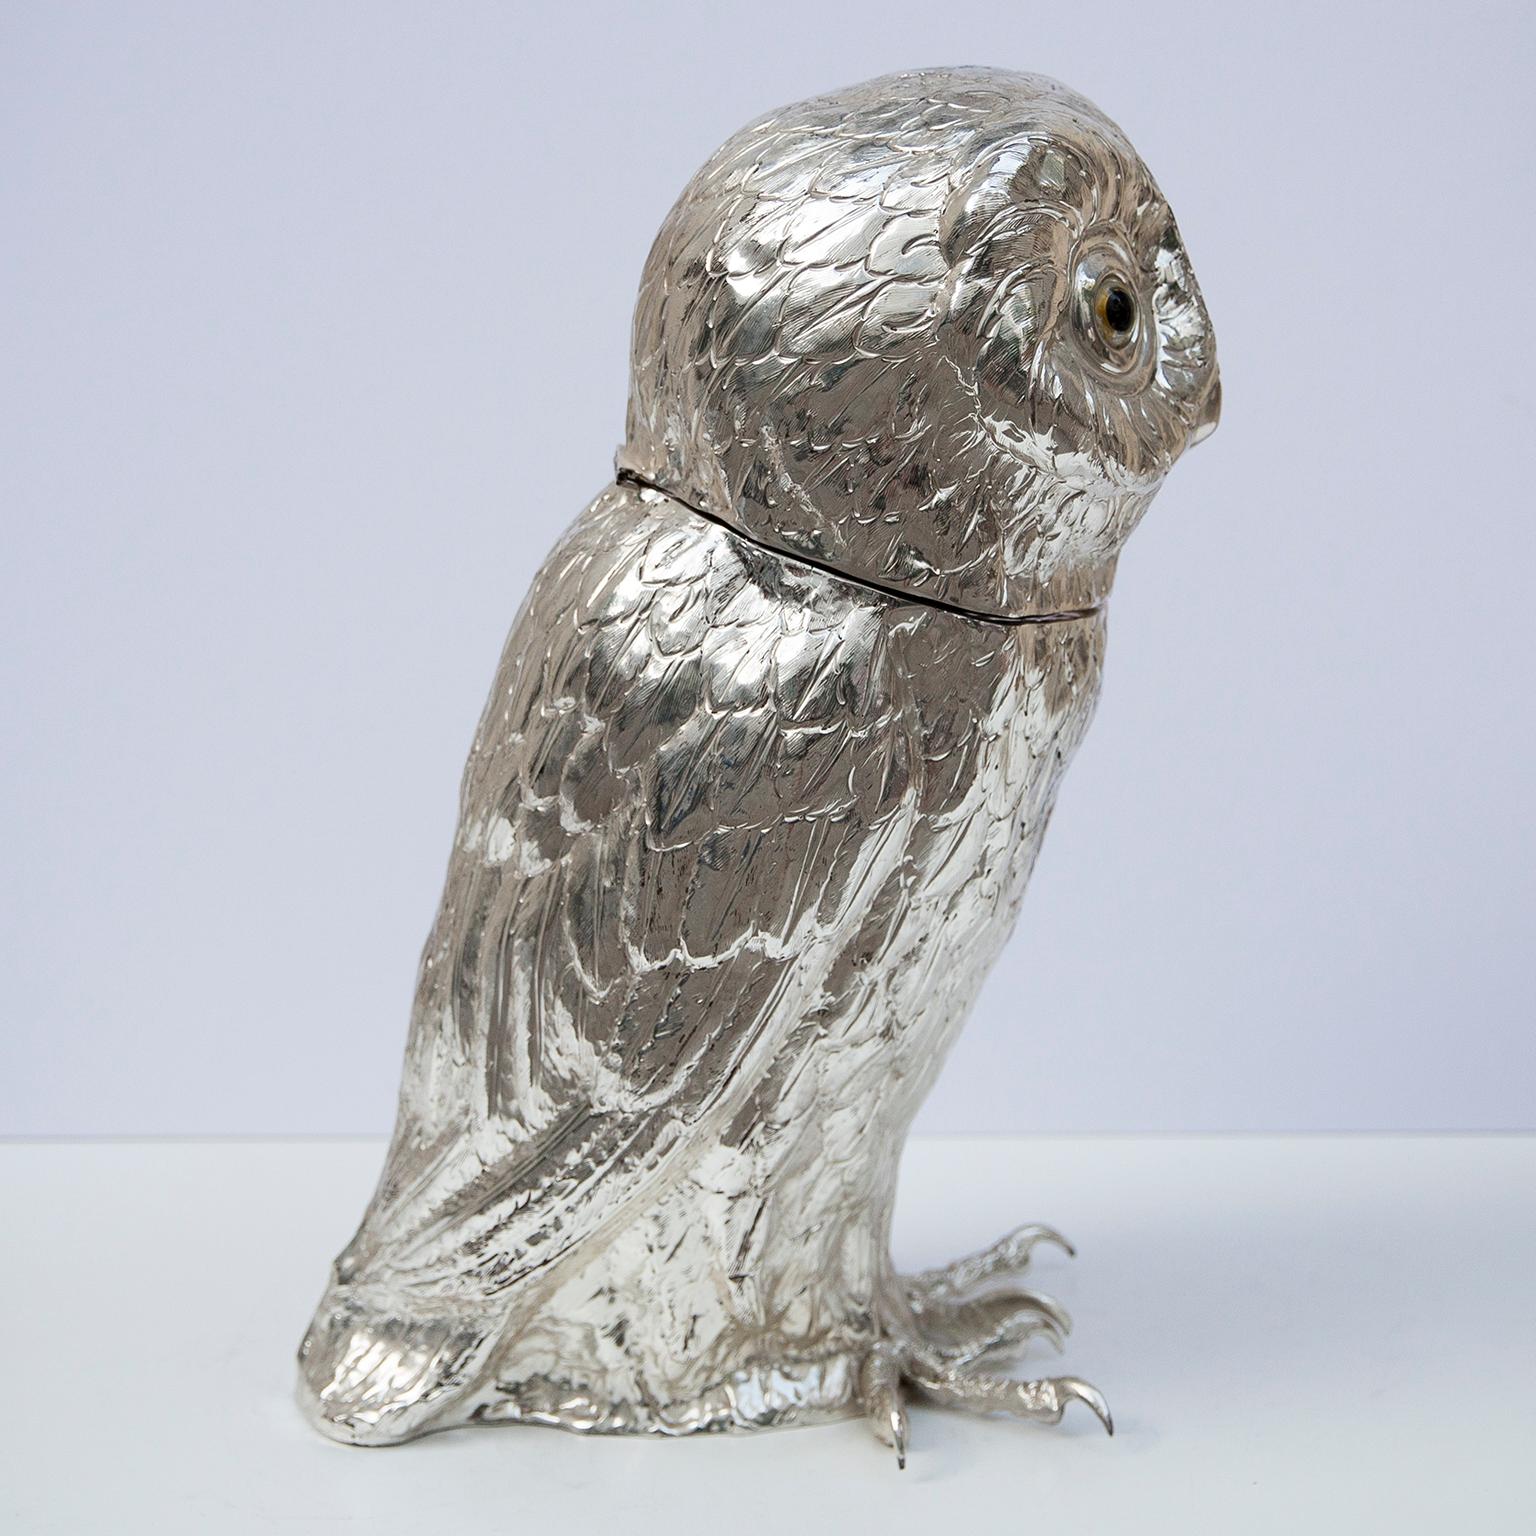 Franco Lapinis exquisite owl ice bucket and wine cooler is made entirely of metal plated in silver and its surface is lightly textured to give it an organic feel. When you open the head, there is removable plastic inlay. Either alone or combined